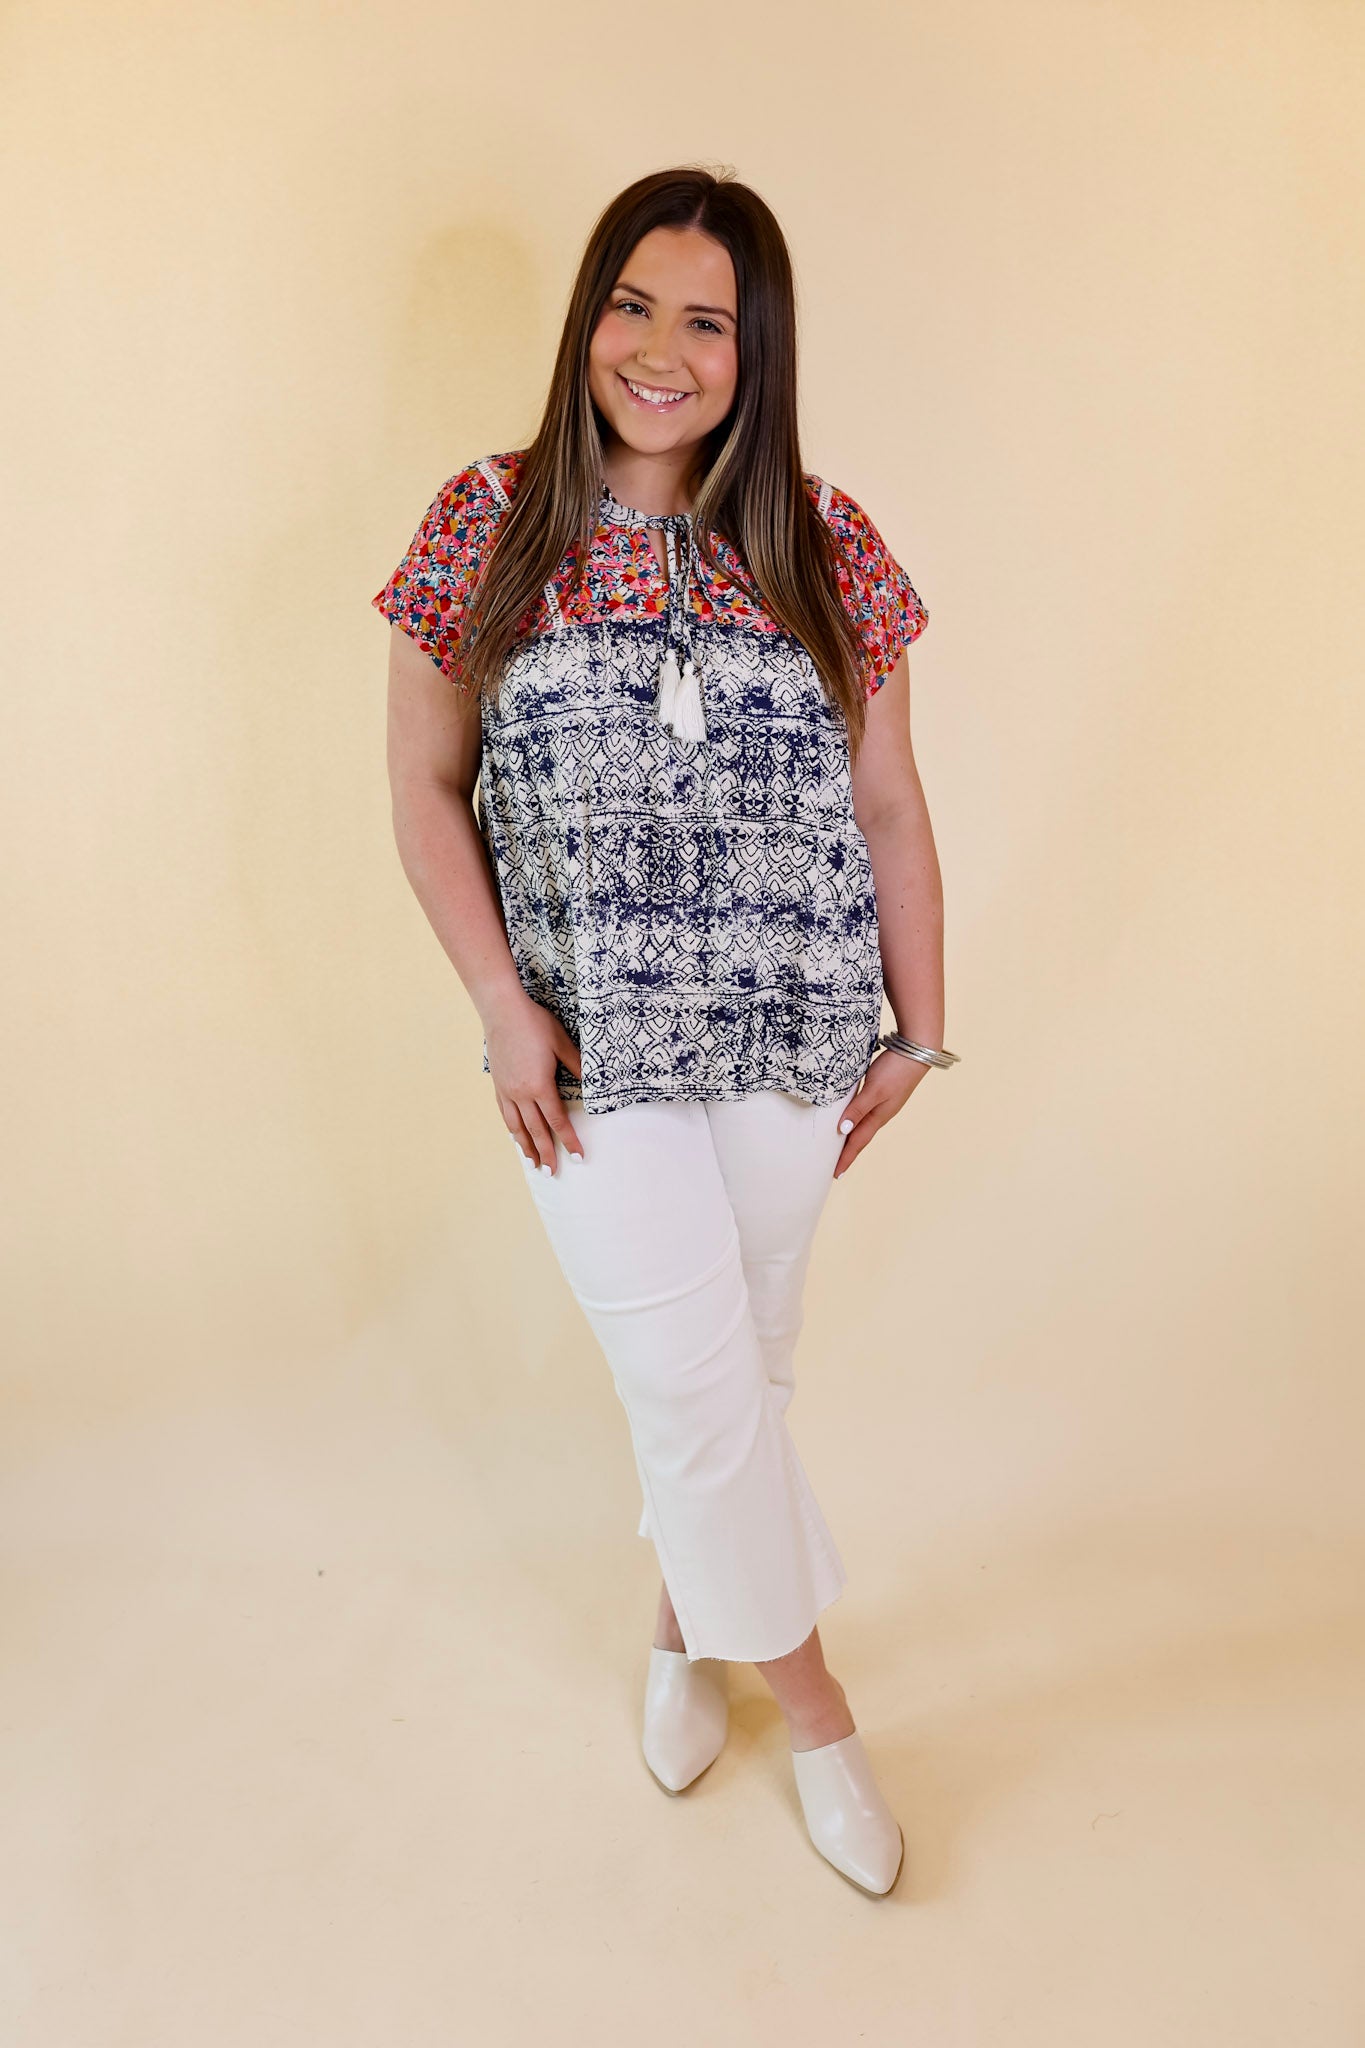 Fredericksburg In the Spring Embroidered Top with Front Keyhole in Ivory and Navy - Giddy Up Glamour Boutique